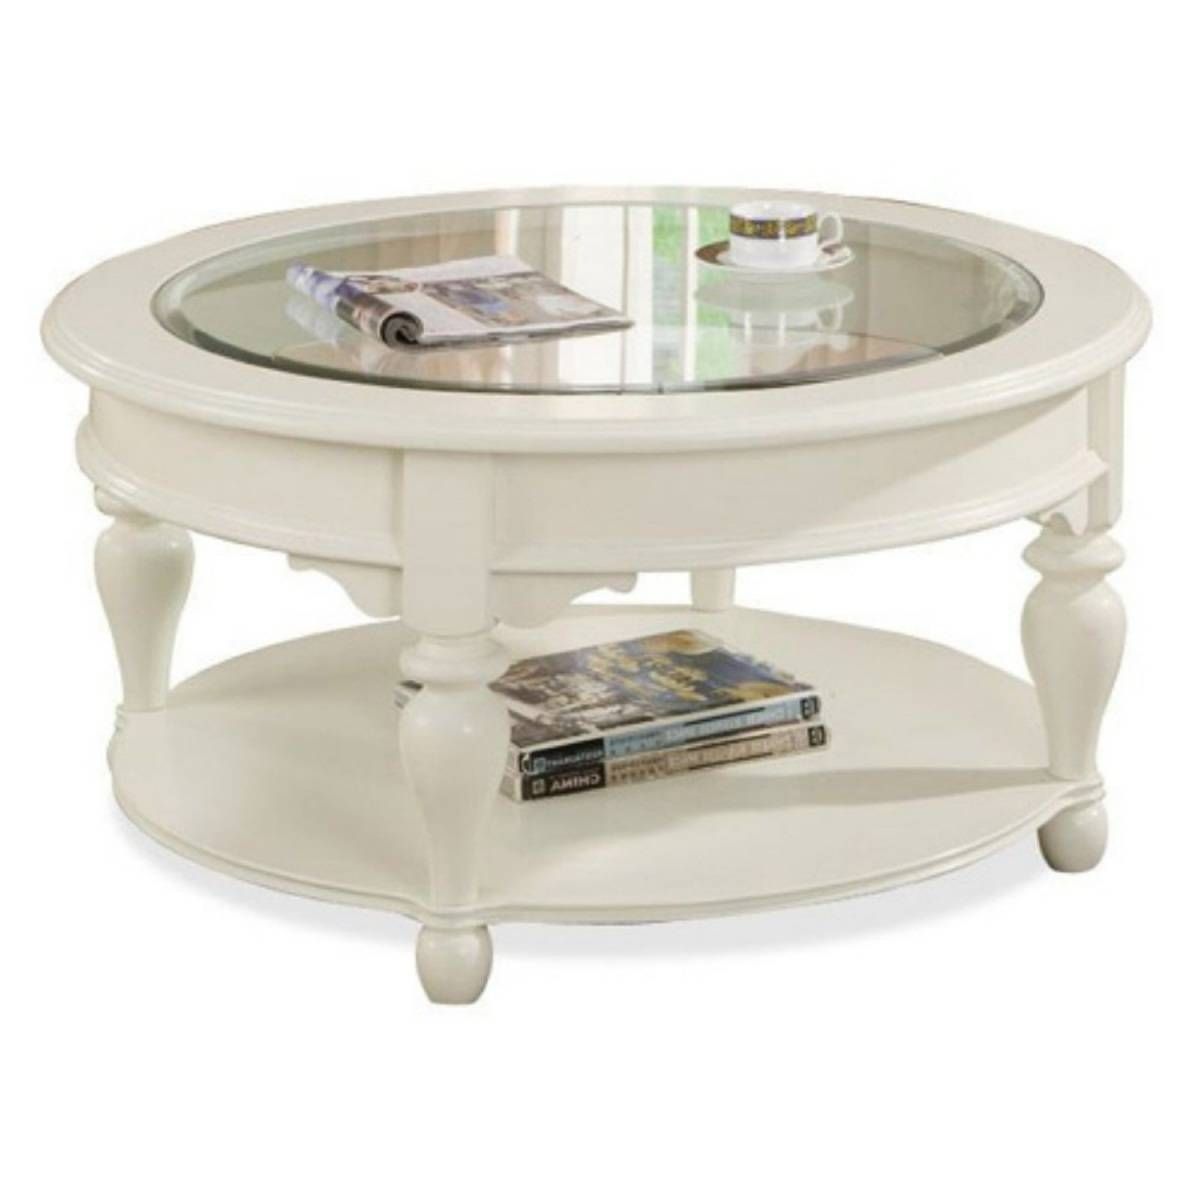 Marvelous Style Square Coffee Table With Storage – 50 Square Within White Coffee Tables With Baskets (View 9 of 30)